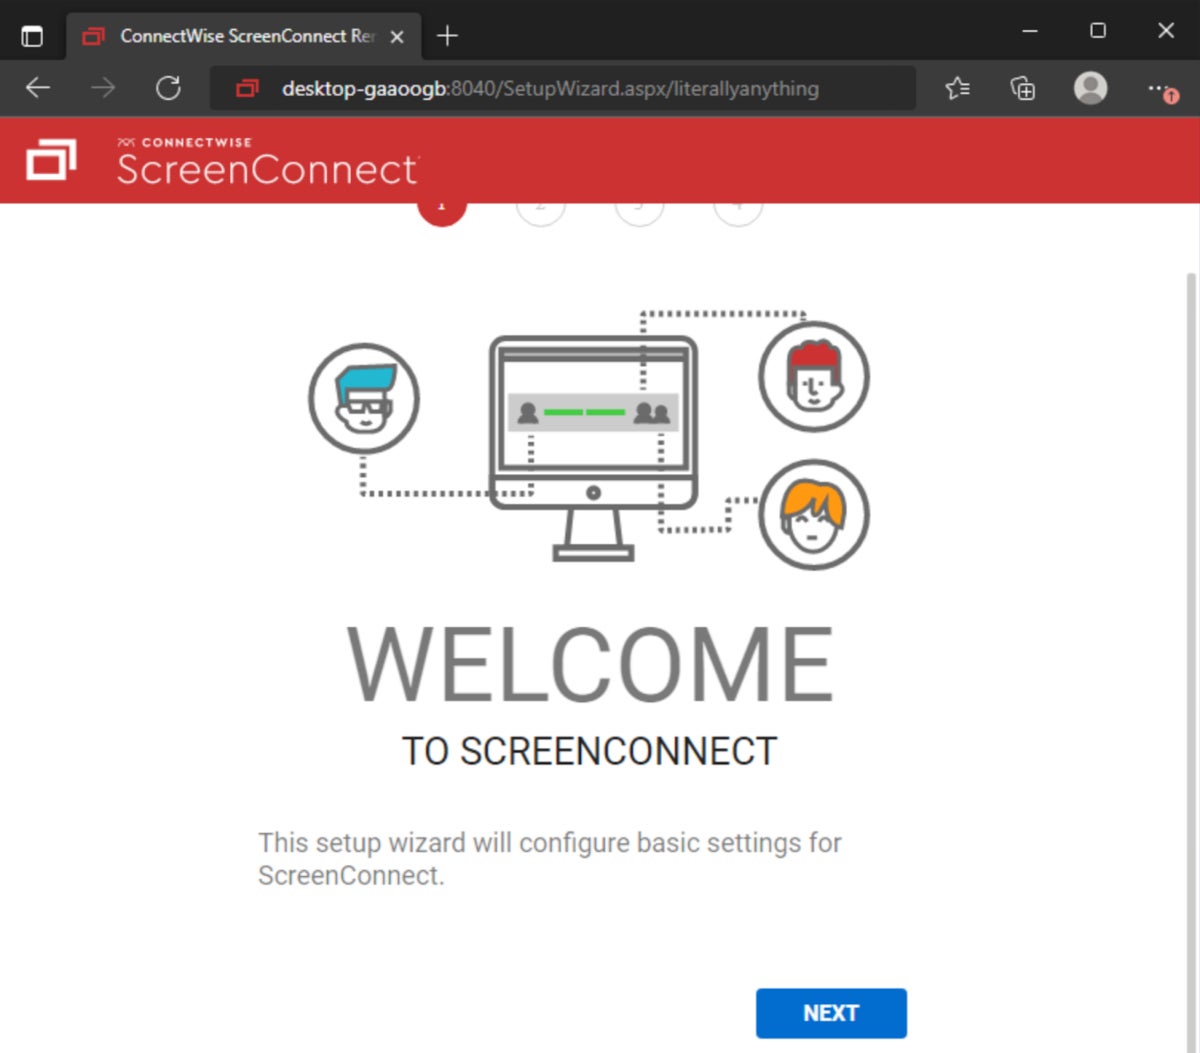 Unauthenticated access to the ScreenConnect setup wizard.